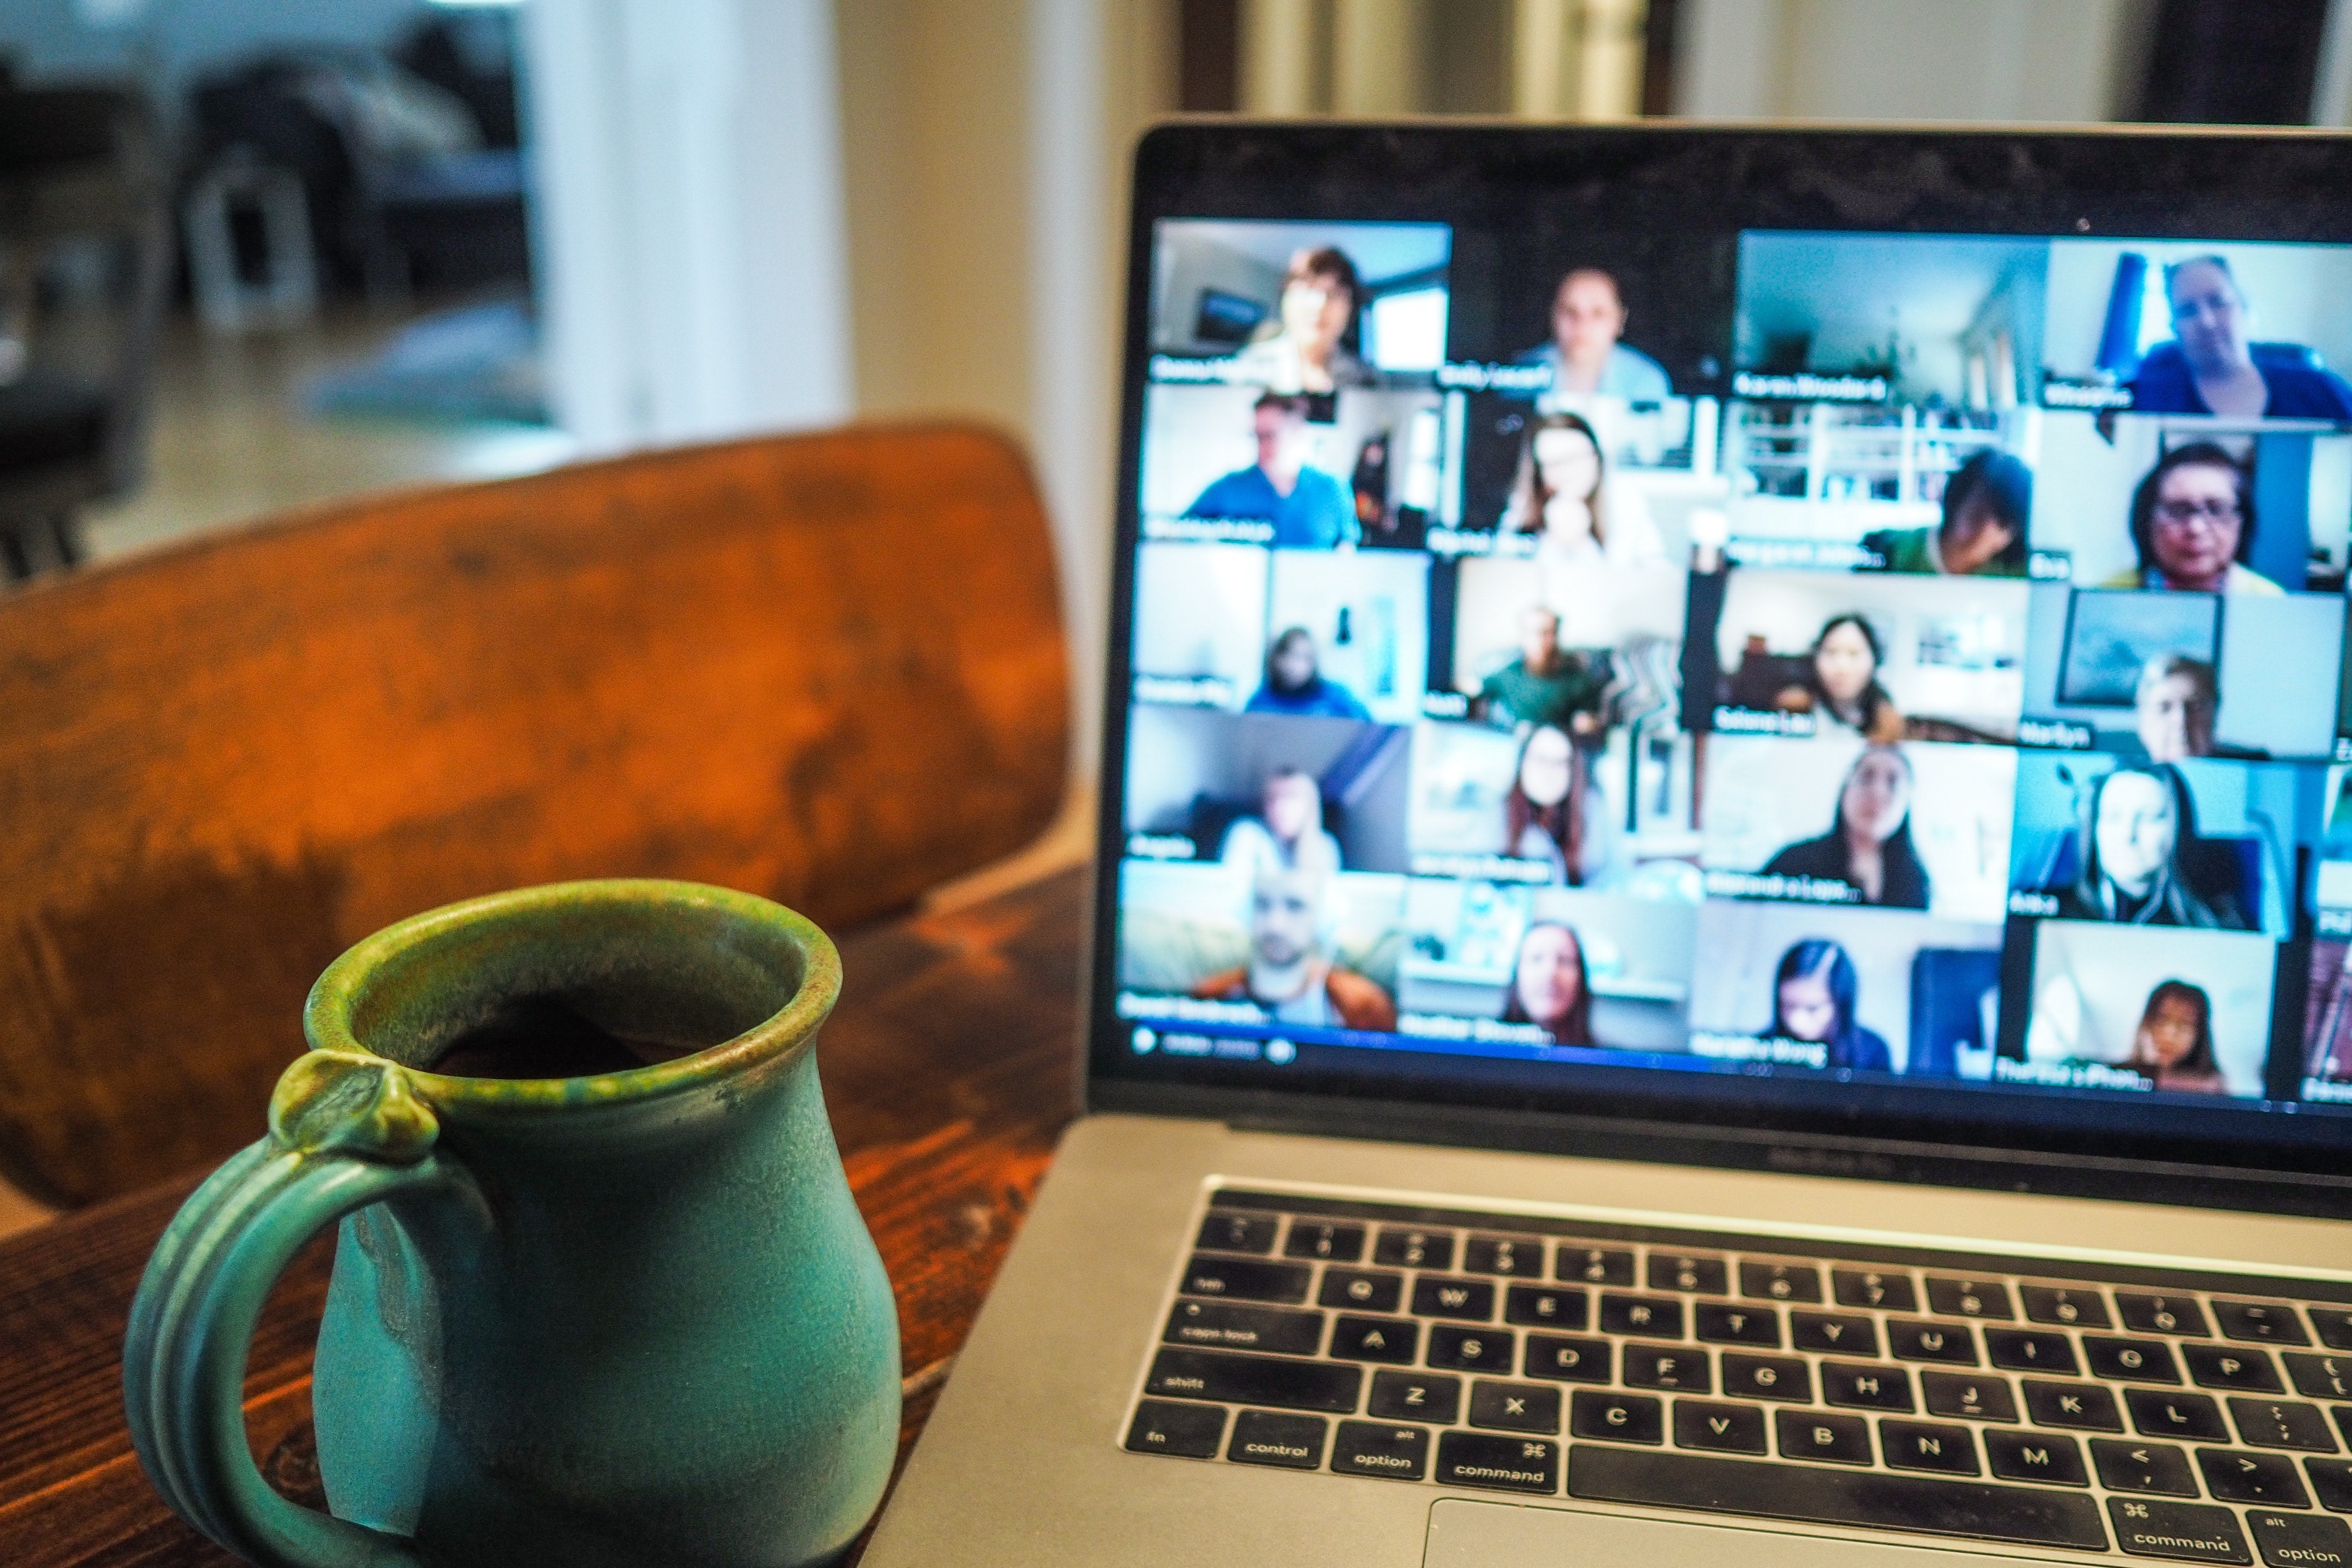 A mug and laptop showing a grid of faces on Zoom sit on a table.